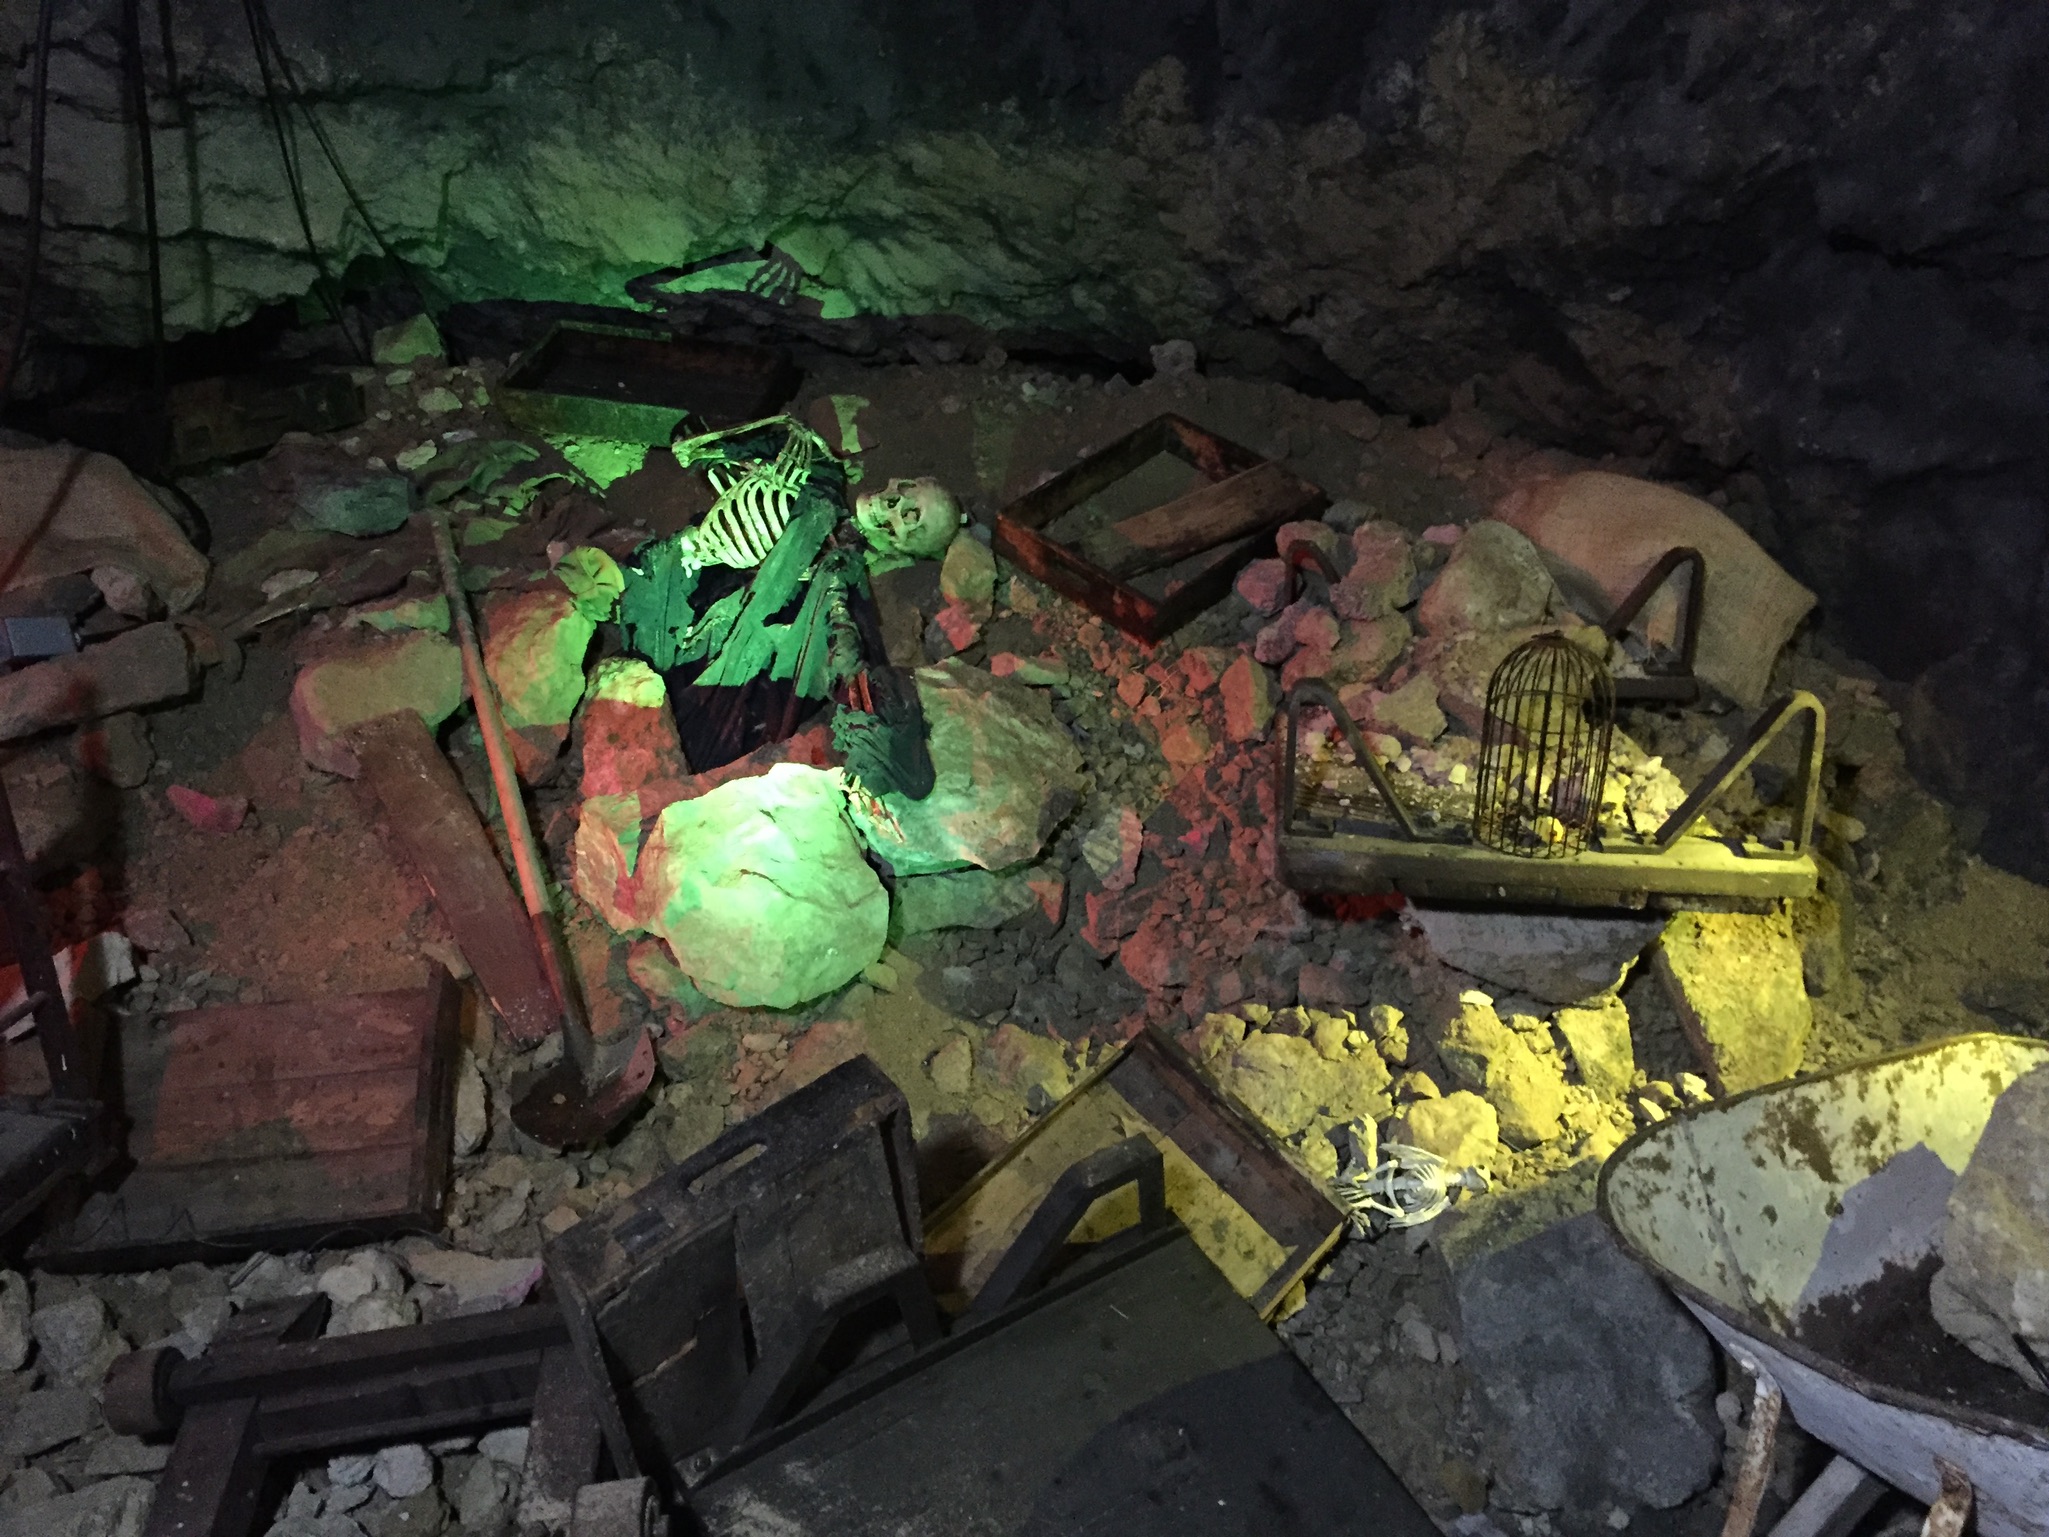 Mining relics and spooky theming enhances the scare factor of the new Haunted Mine Drop at Glenwood Caverns Adventure Park in Glenwood Springs, Colorado.